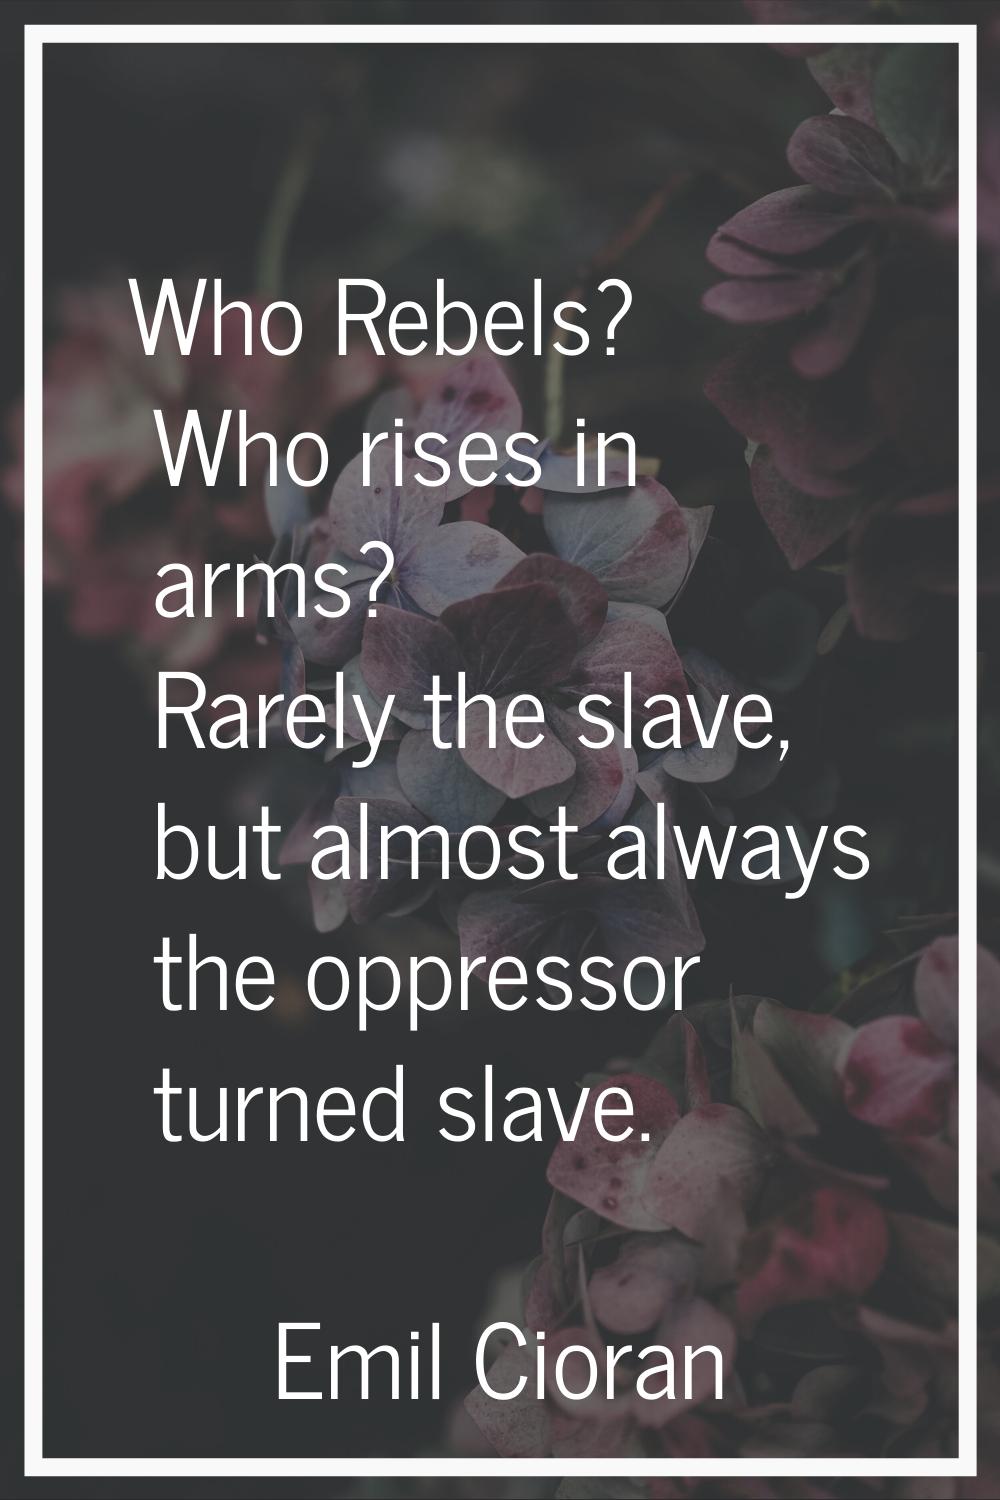 Who Rebels? Who rises in arms? Rarely the slave, but almost always the oppressor turned slave.